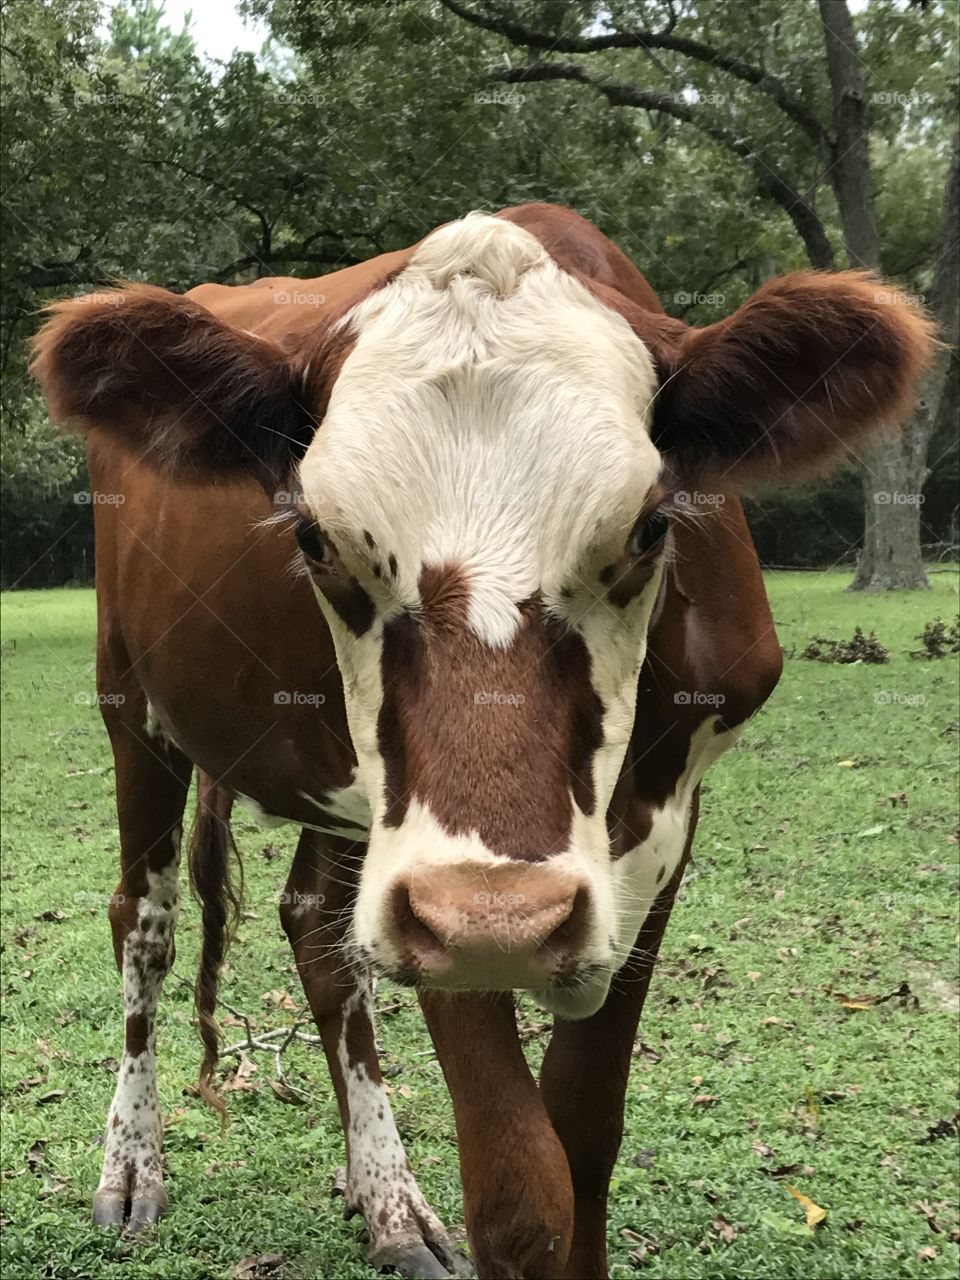 Face to face with a cute cow